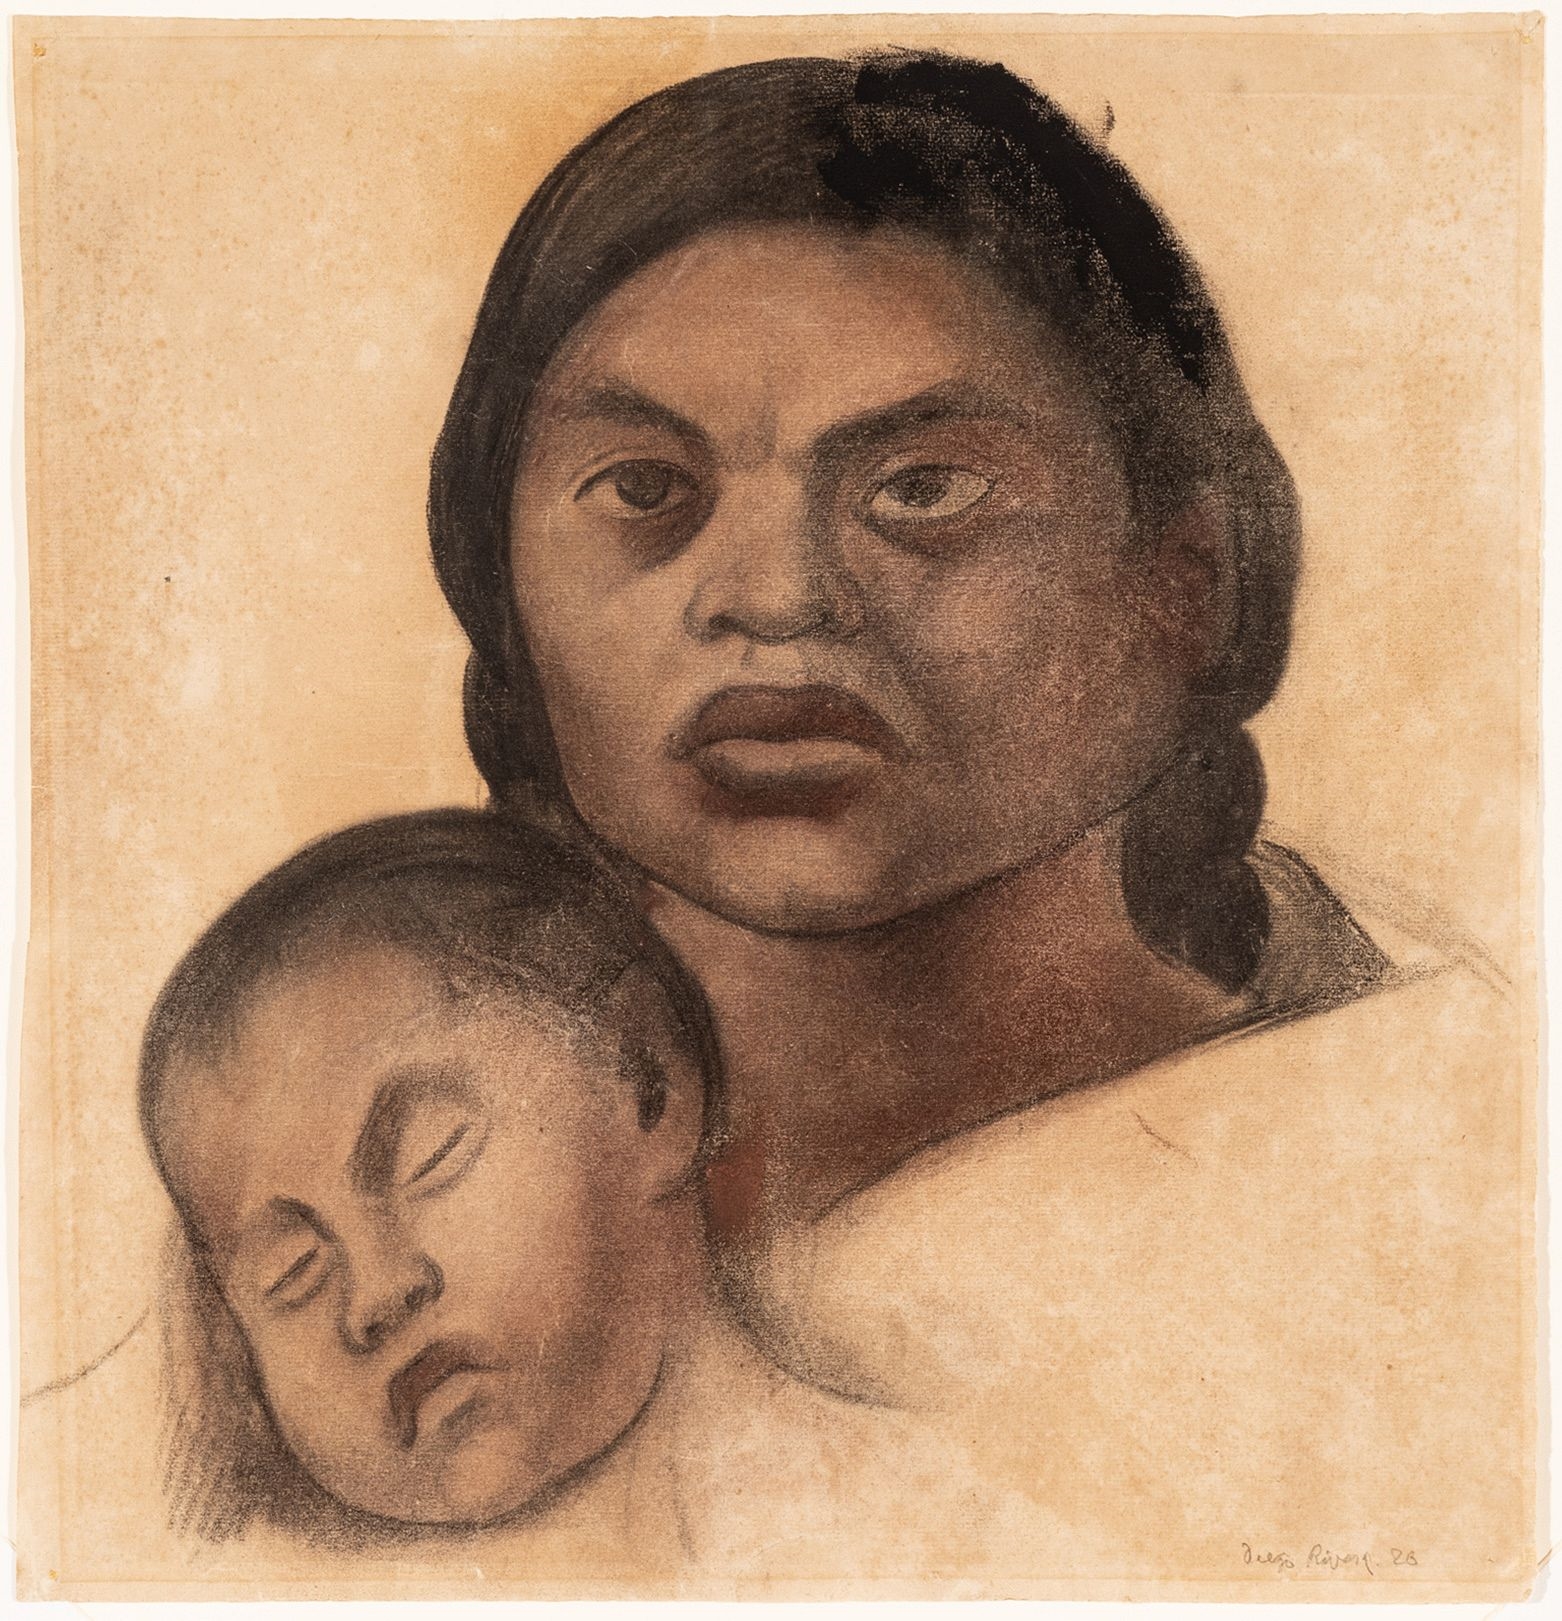 Diego Rivera (Mexican, 1886-1957) Charcoal And Pastel on Paper, 1926, "Mother And Child", H 18.8" W 17.9 - Diego Rivera